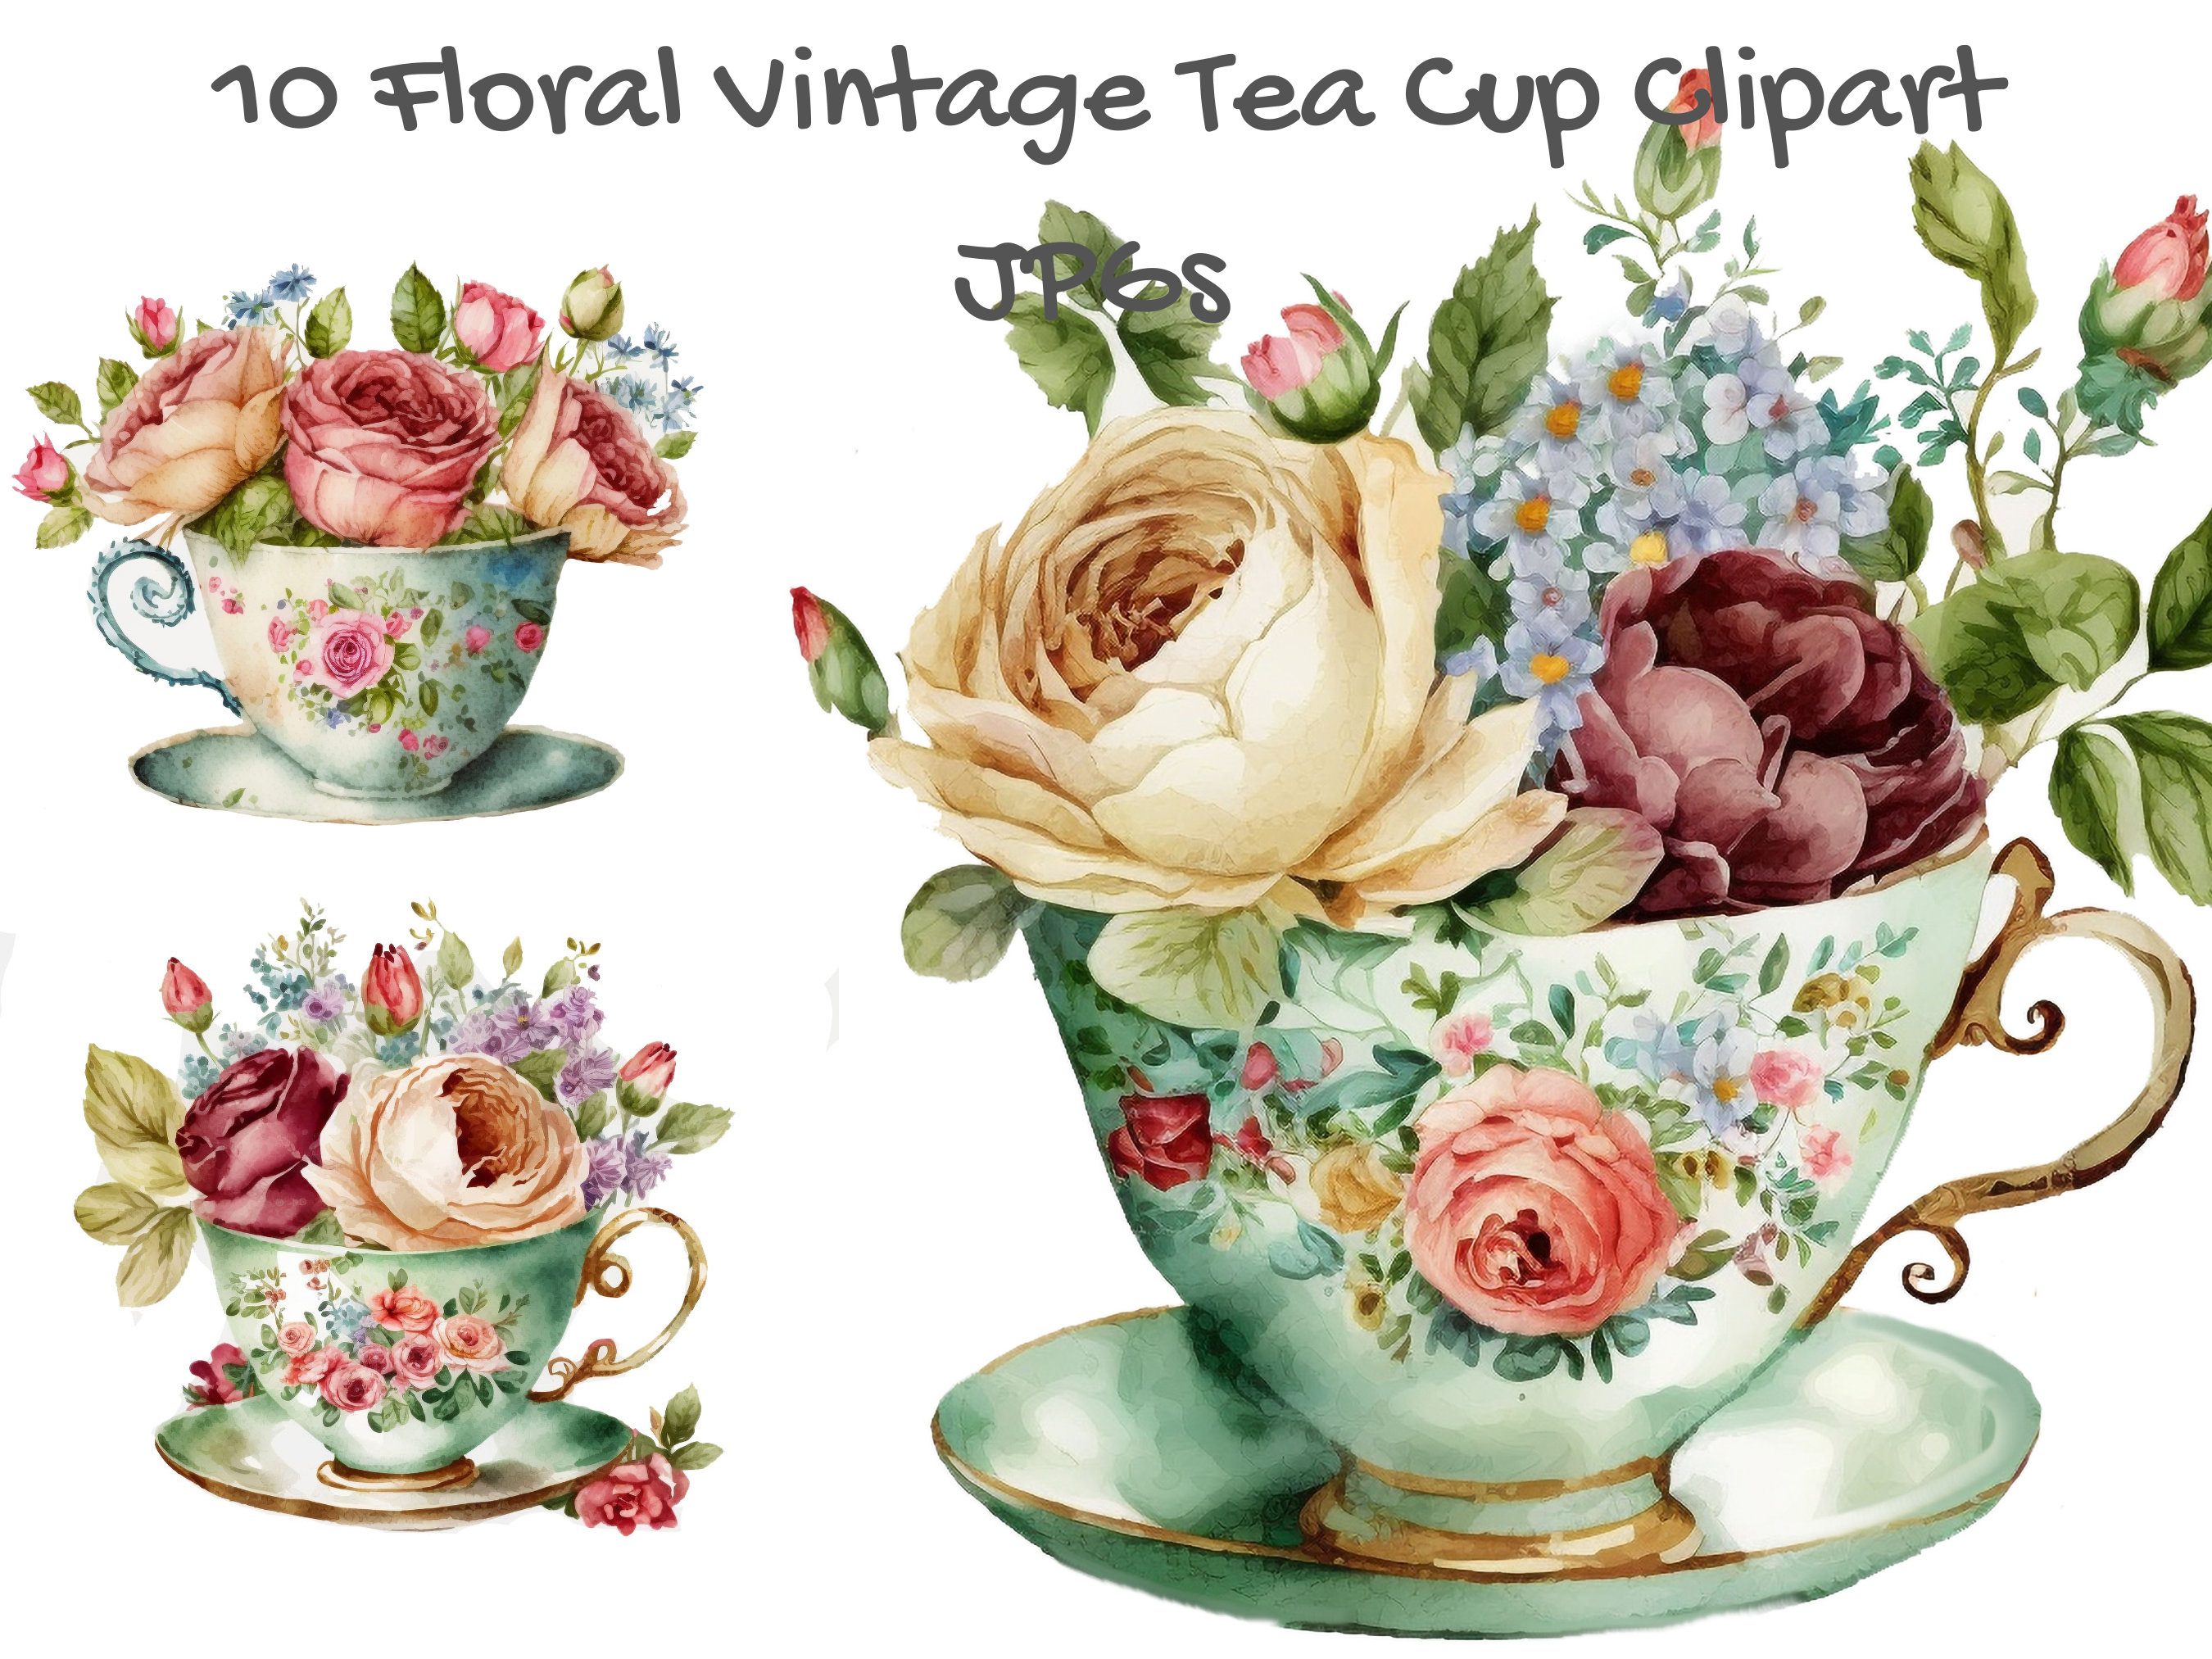 Tea Cup Clipart Set Vintage Tea and Coffee Cups Teacup Flat Images  Commercial Use Allowed INSTANT DOWNLOAD 34 .PNG Images 